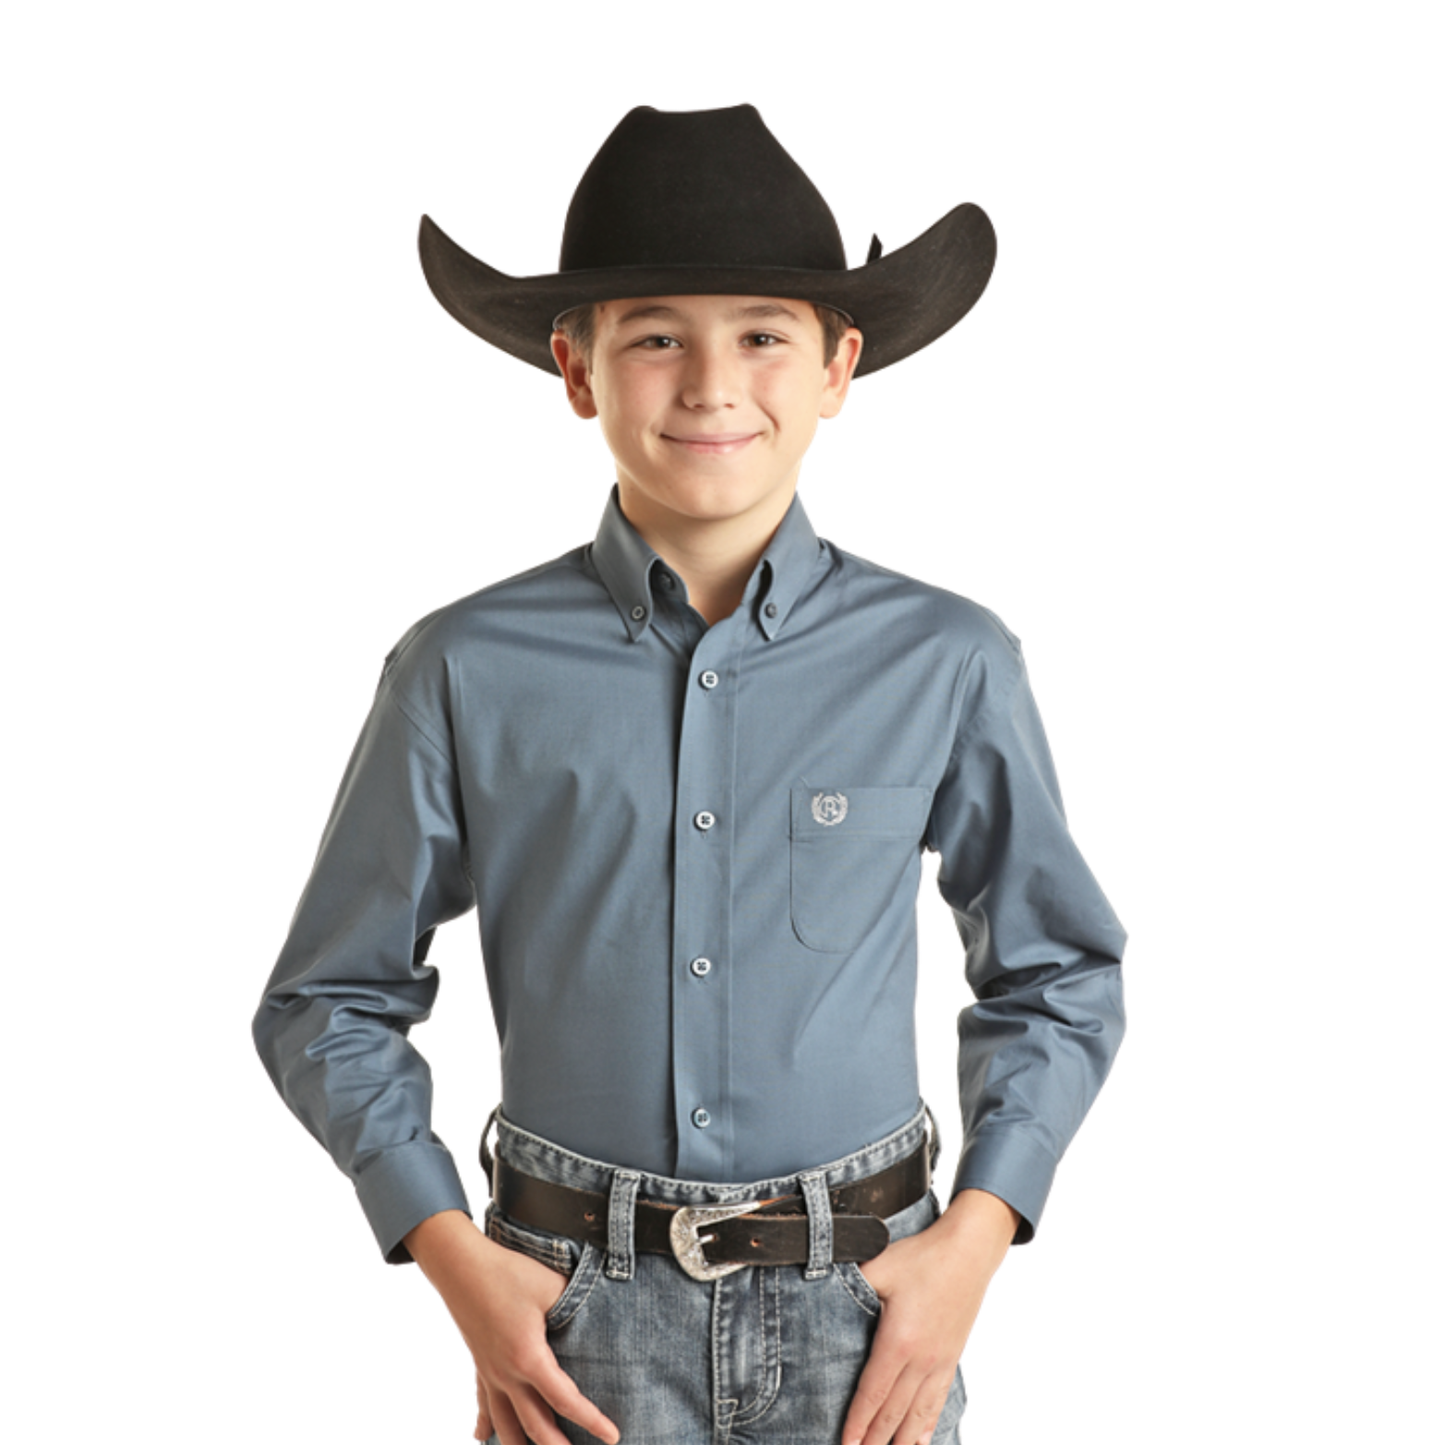 Panhandle Youth Boy's Solid Blue Button Down Shirt PBB2S01876-45